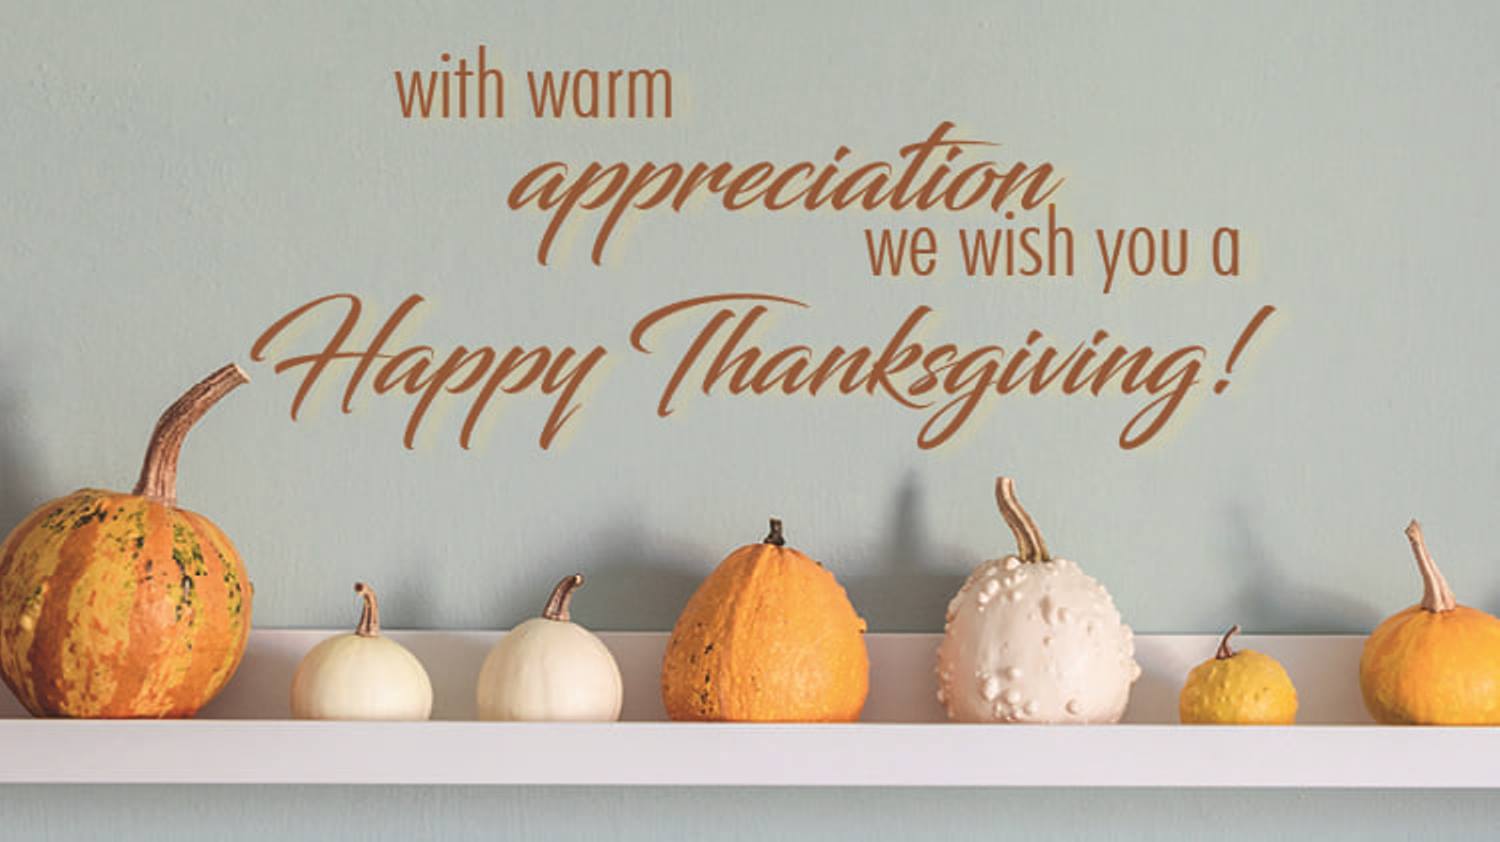 Happy Thanksgiving from the team at Home Accents Today!